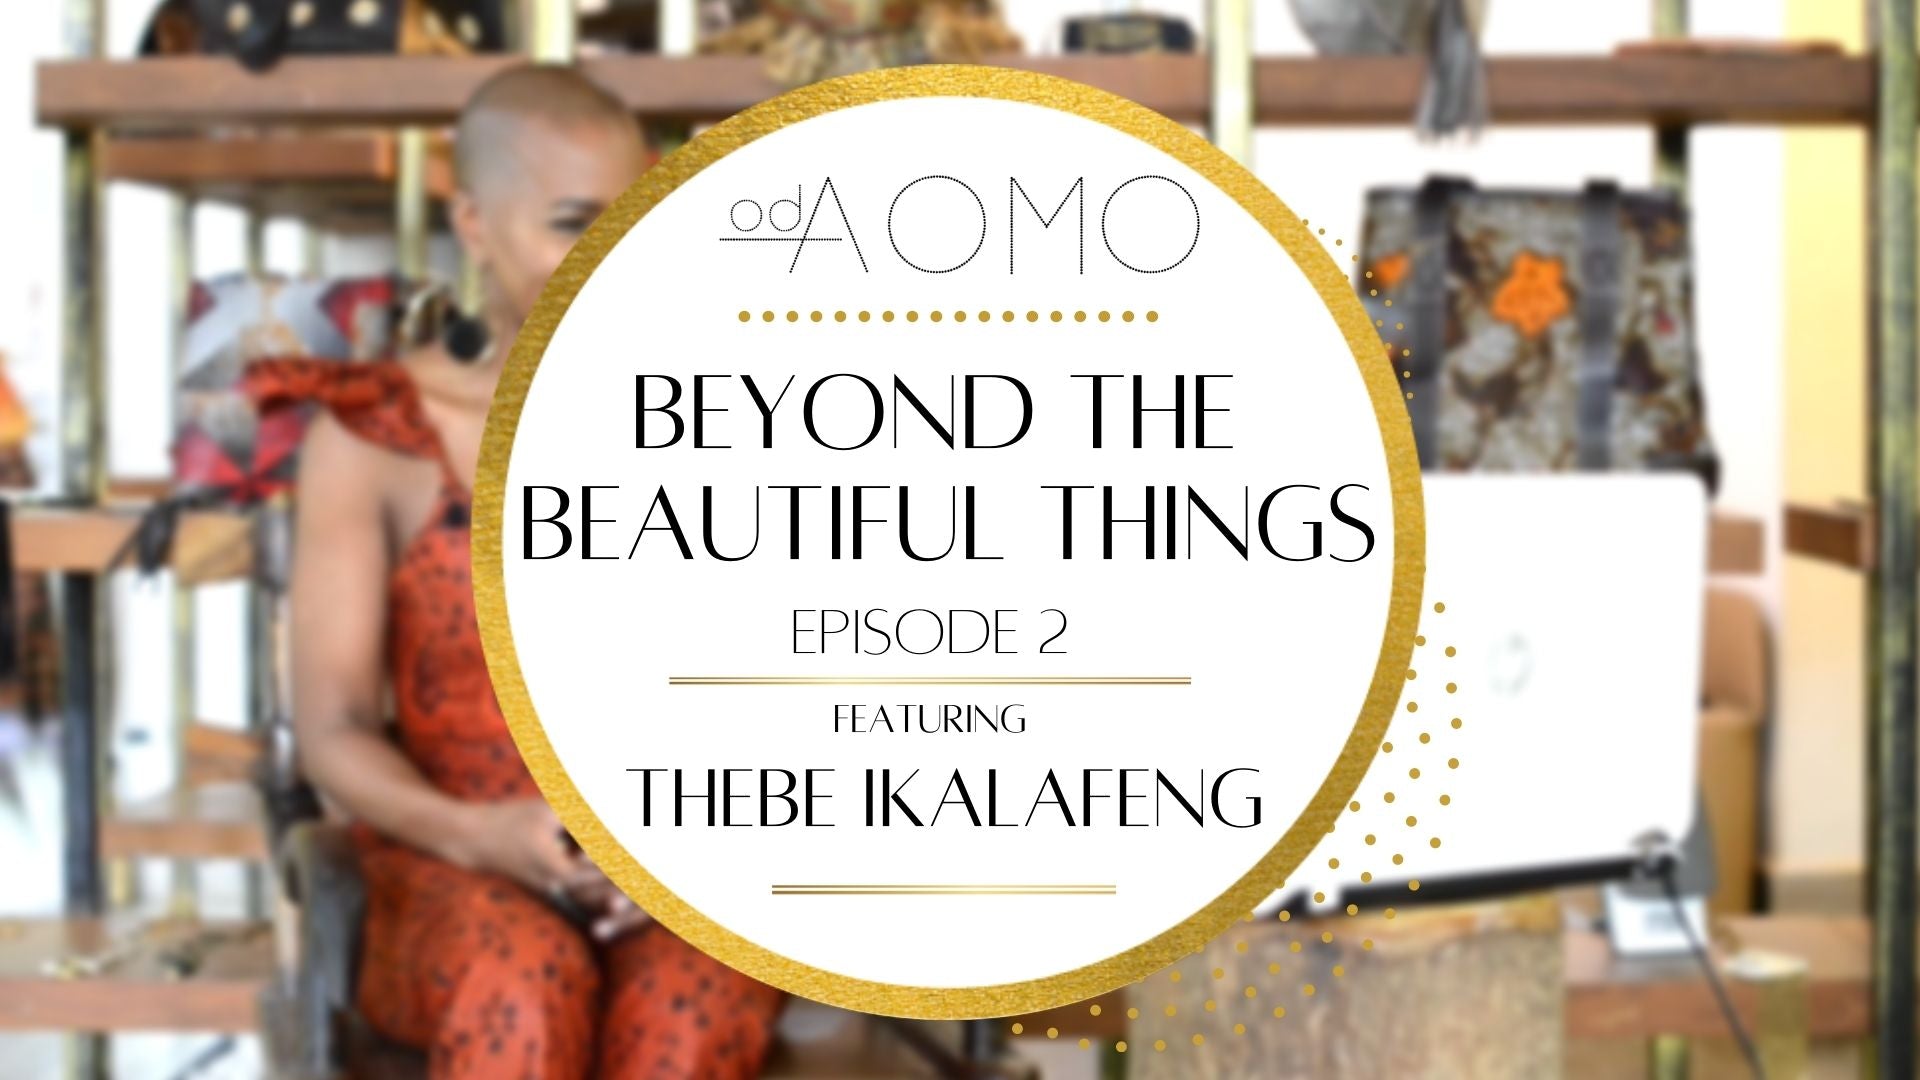 On this episode of Beyond the Beautiful Things, we are introduced to the African Brand King, Thebe Ikalafeng. As the well traveled founder of Africa Brand Leadership Academy, Brand Africa, & many other esteemed organizations.